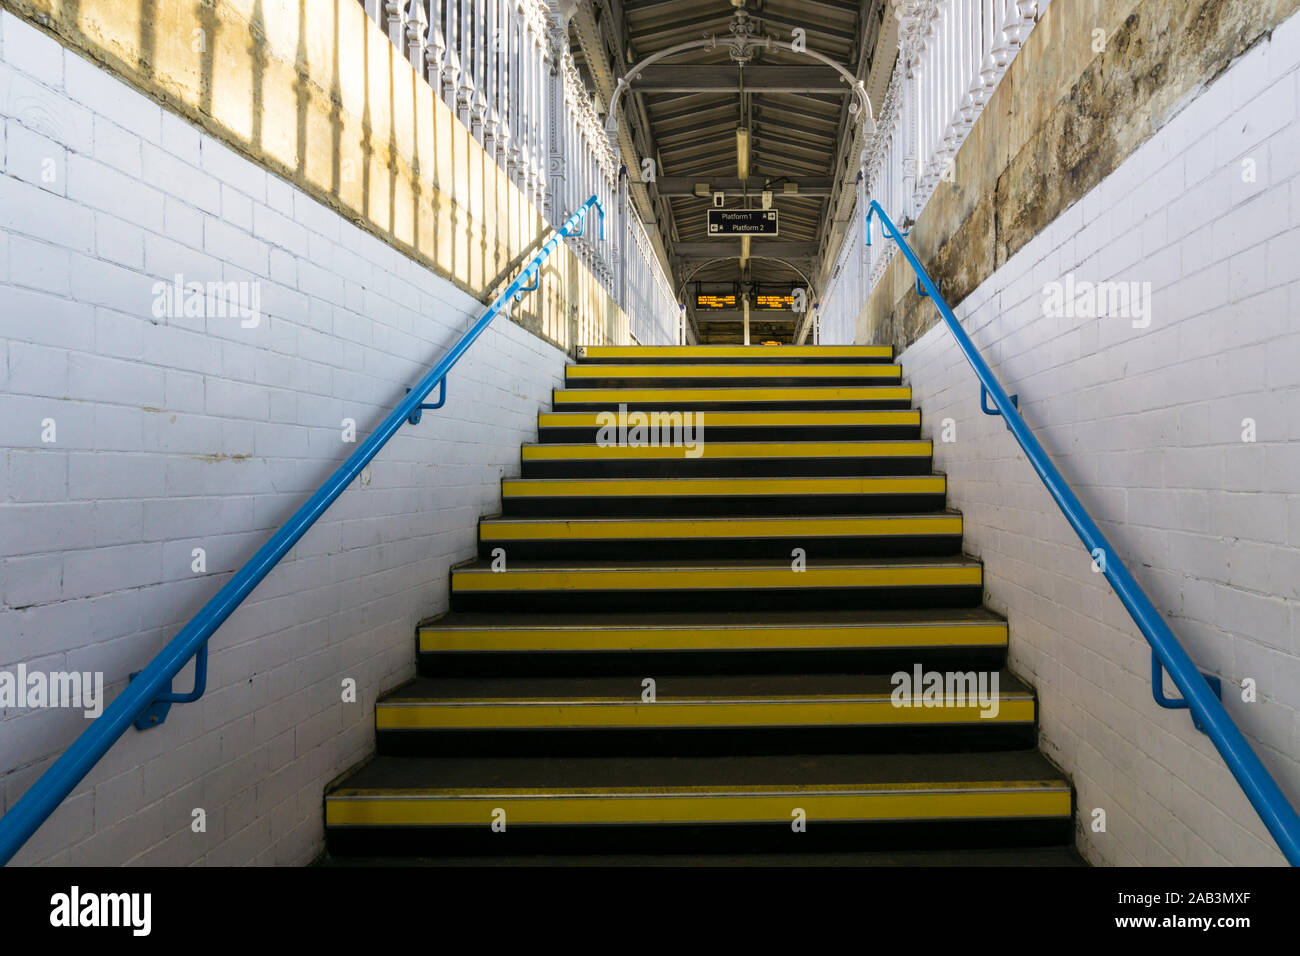 Stairs leading up to railway platform at Shortlands station in South London, Stock Photo